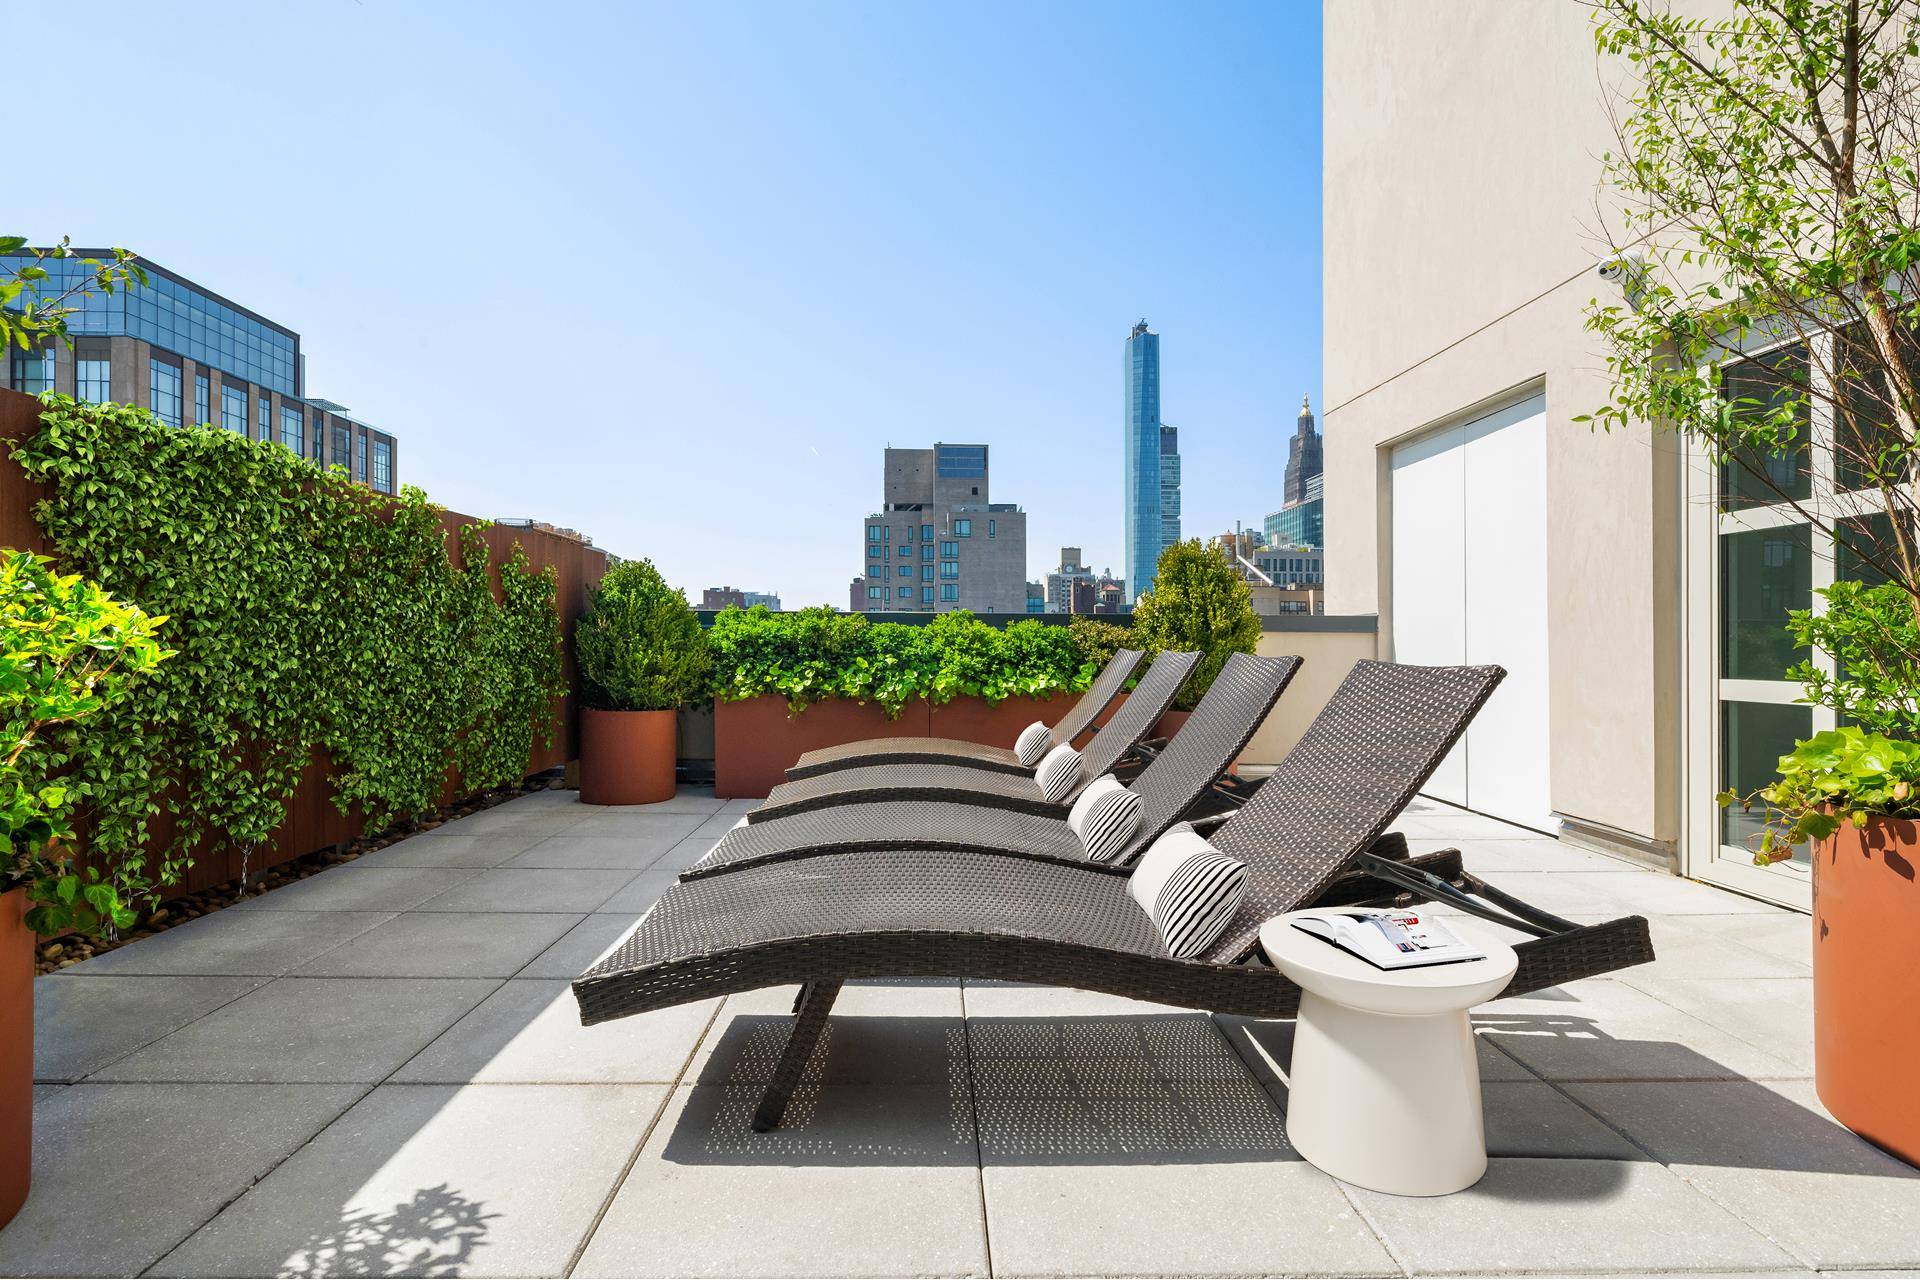 PRICE IMPROVEMENT AT THE BEST NEW DEVELOPMENT IN GRAMERCYWith interiors designed by the celebrated Paris Forino, Residence 10B at 250 East 21st Street is a 2, 468 square foot four ...